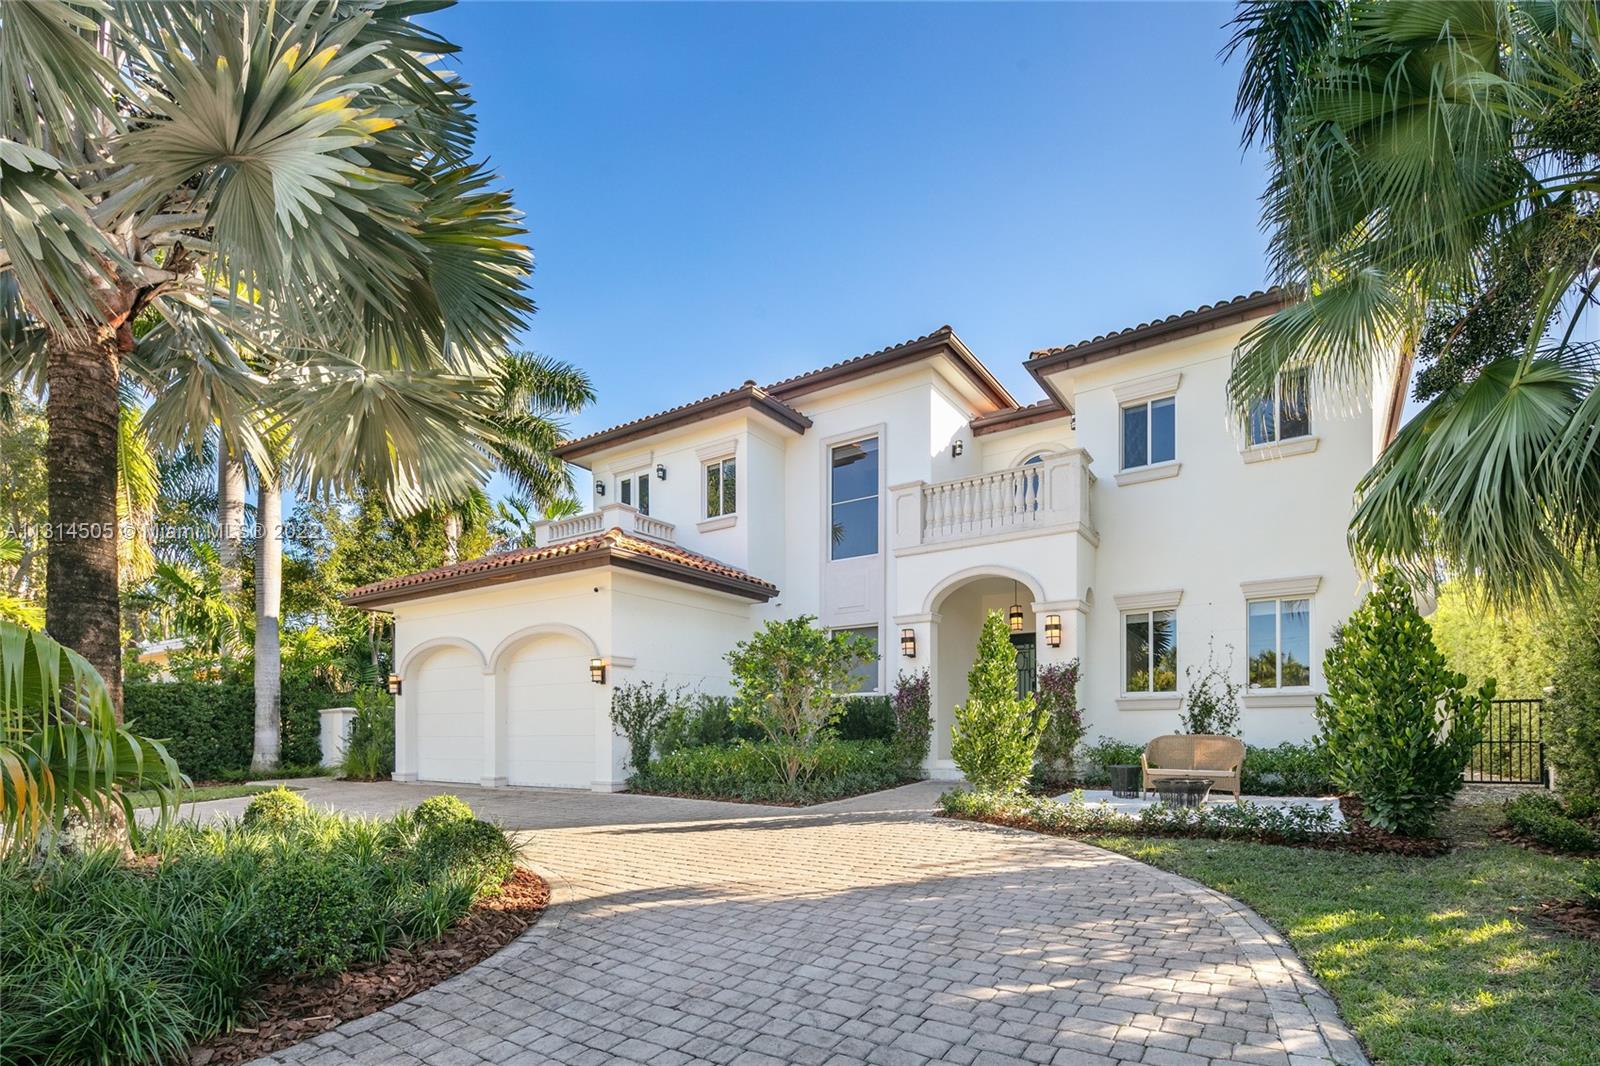 Elegant and sophisticated mediterranean mansion in Bay Harbor Islands. This masterpiece was built in 2008 and renovated in 2022. It sits on a 10,000 sq ft lot on the south side of the street, providing incredible amounts of natural sunlight. It features 5,500 sq ft of total living space, including 6 bedrooms and 6.5 bathrooms, and a 2 car garage. The home also has an oversized master bedroom and bathroom with generous walk-in closets, a kitchen with a brand new subzero fridge freezer and other top of the line appliances. It is wired with control 4 home automation including a surveillance system. Its flawless floor plan flows nicely and has the perfect balance of warmth and character.